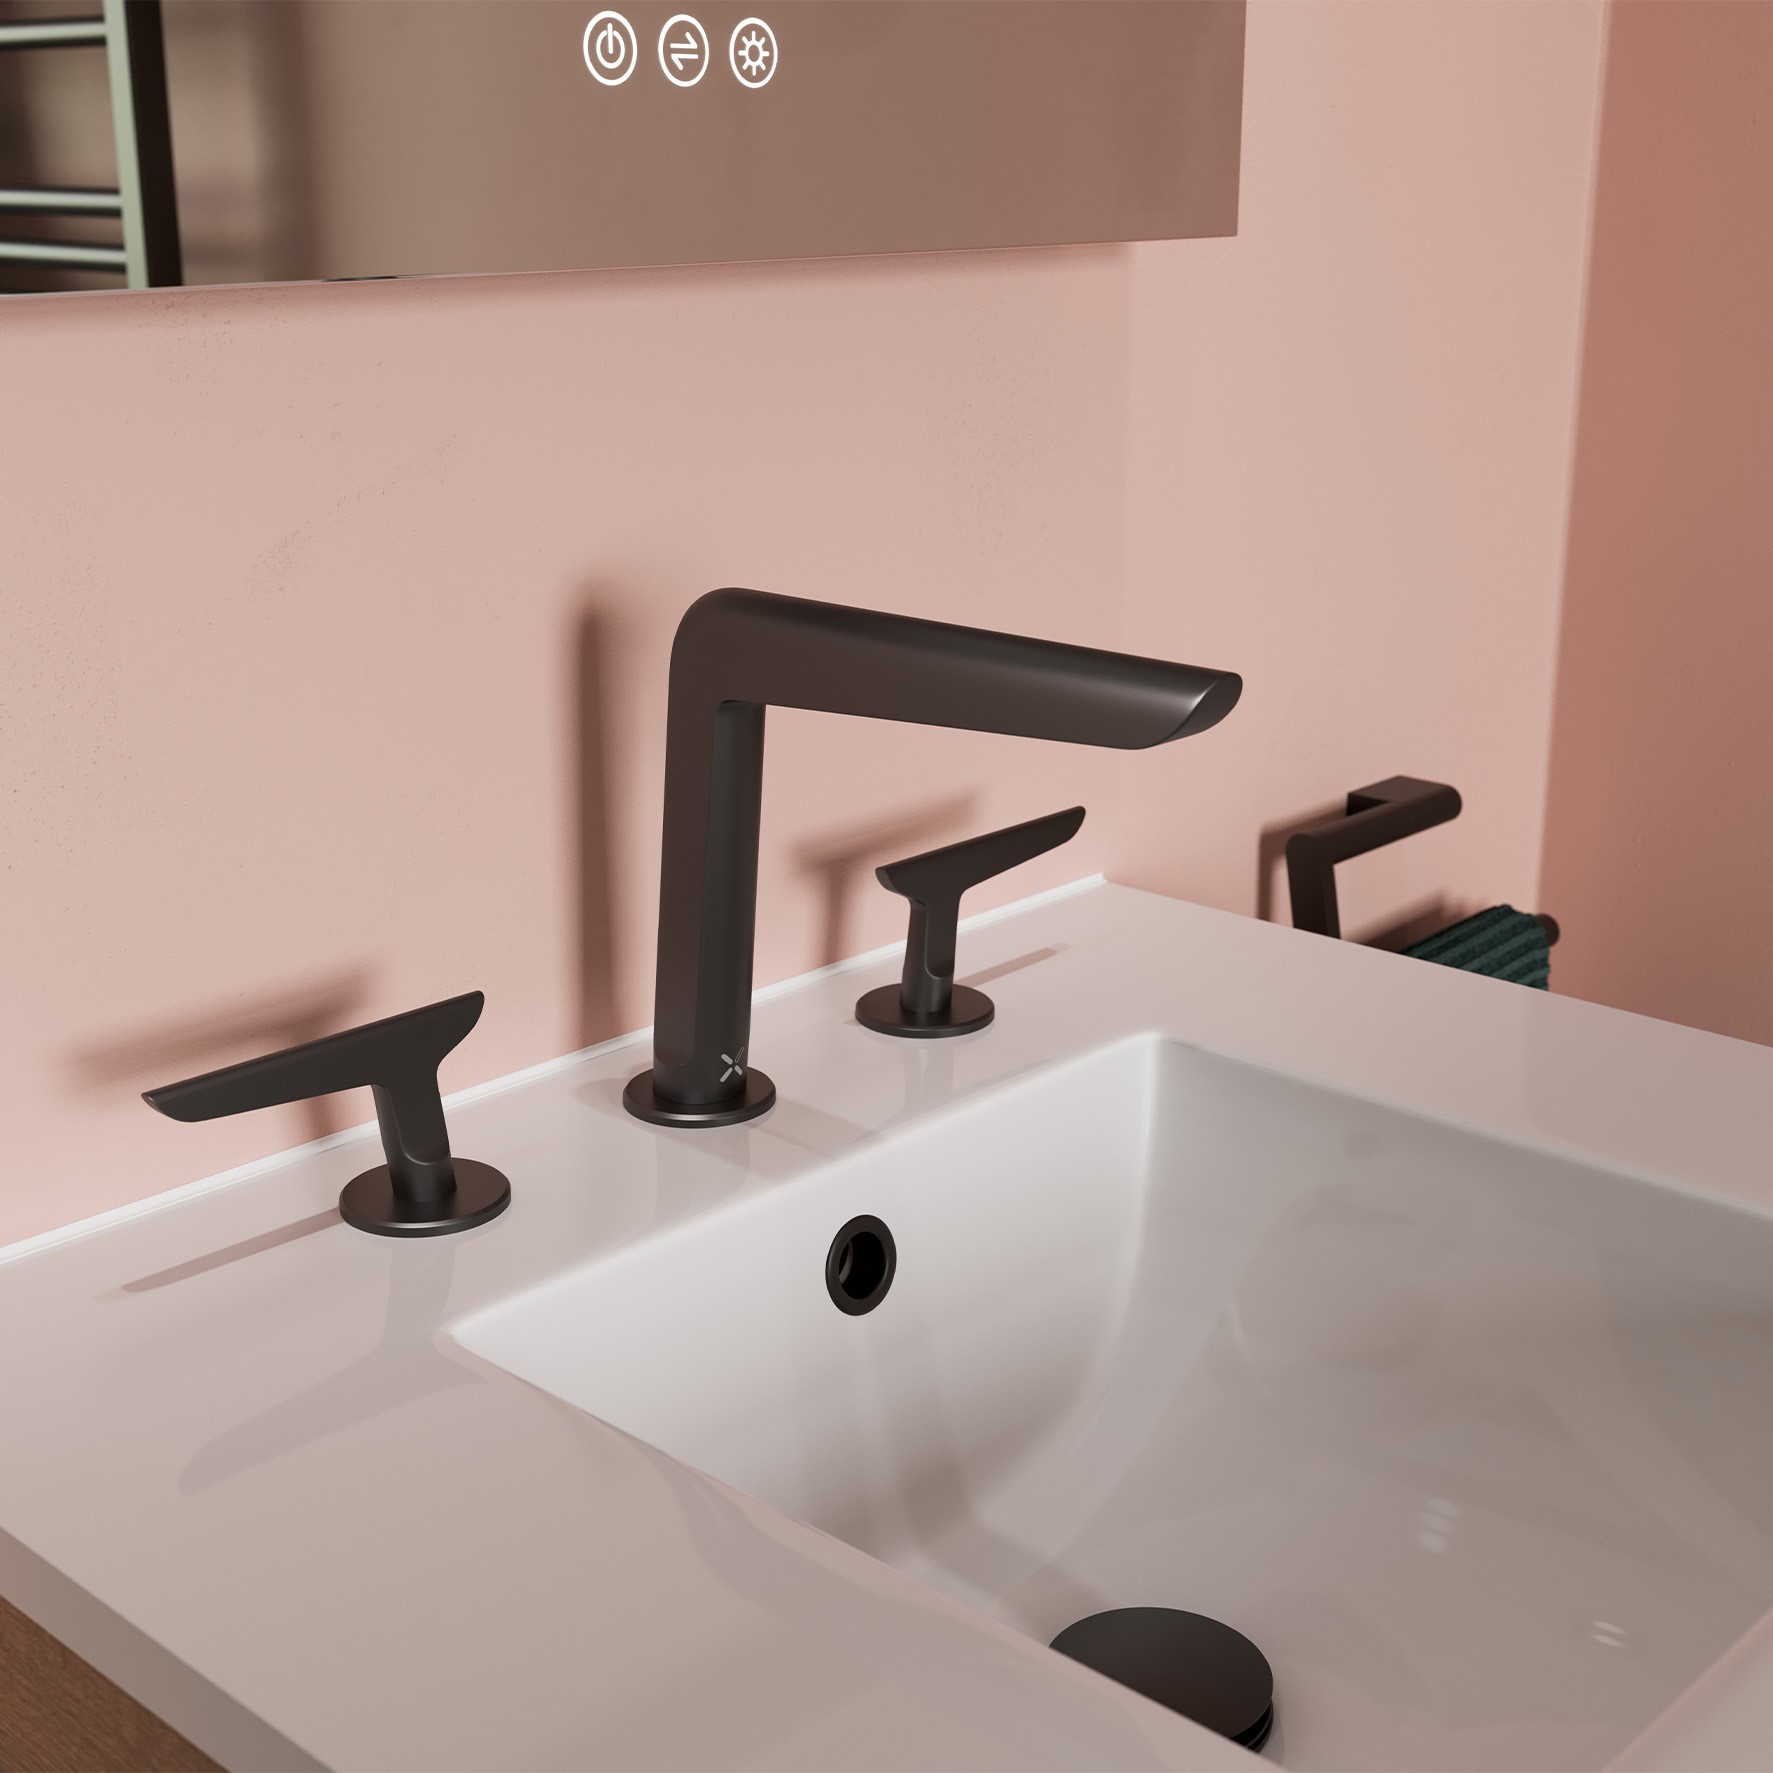 Discover innovative modern brassware design with FOILE by Crosswater.